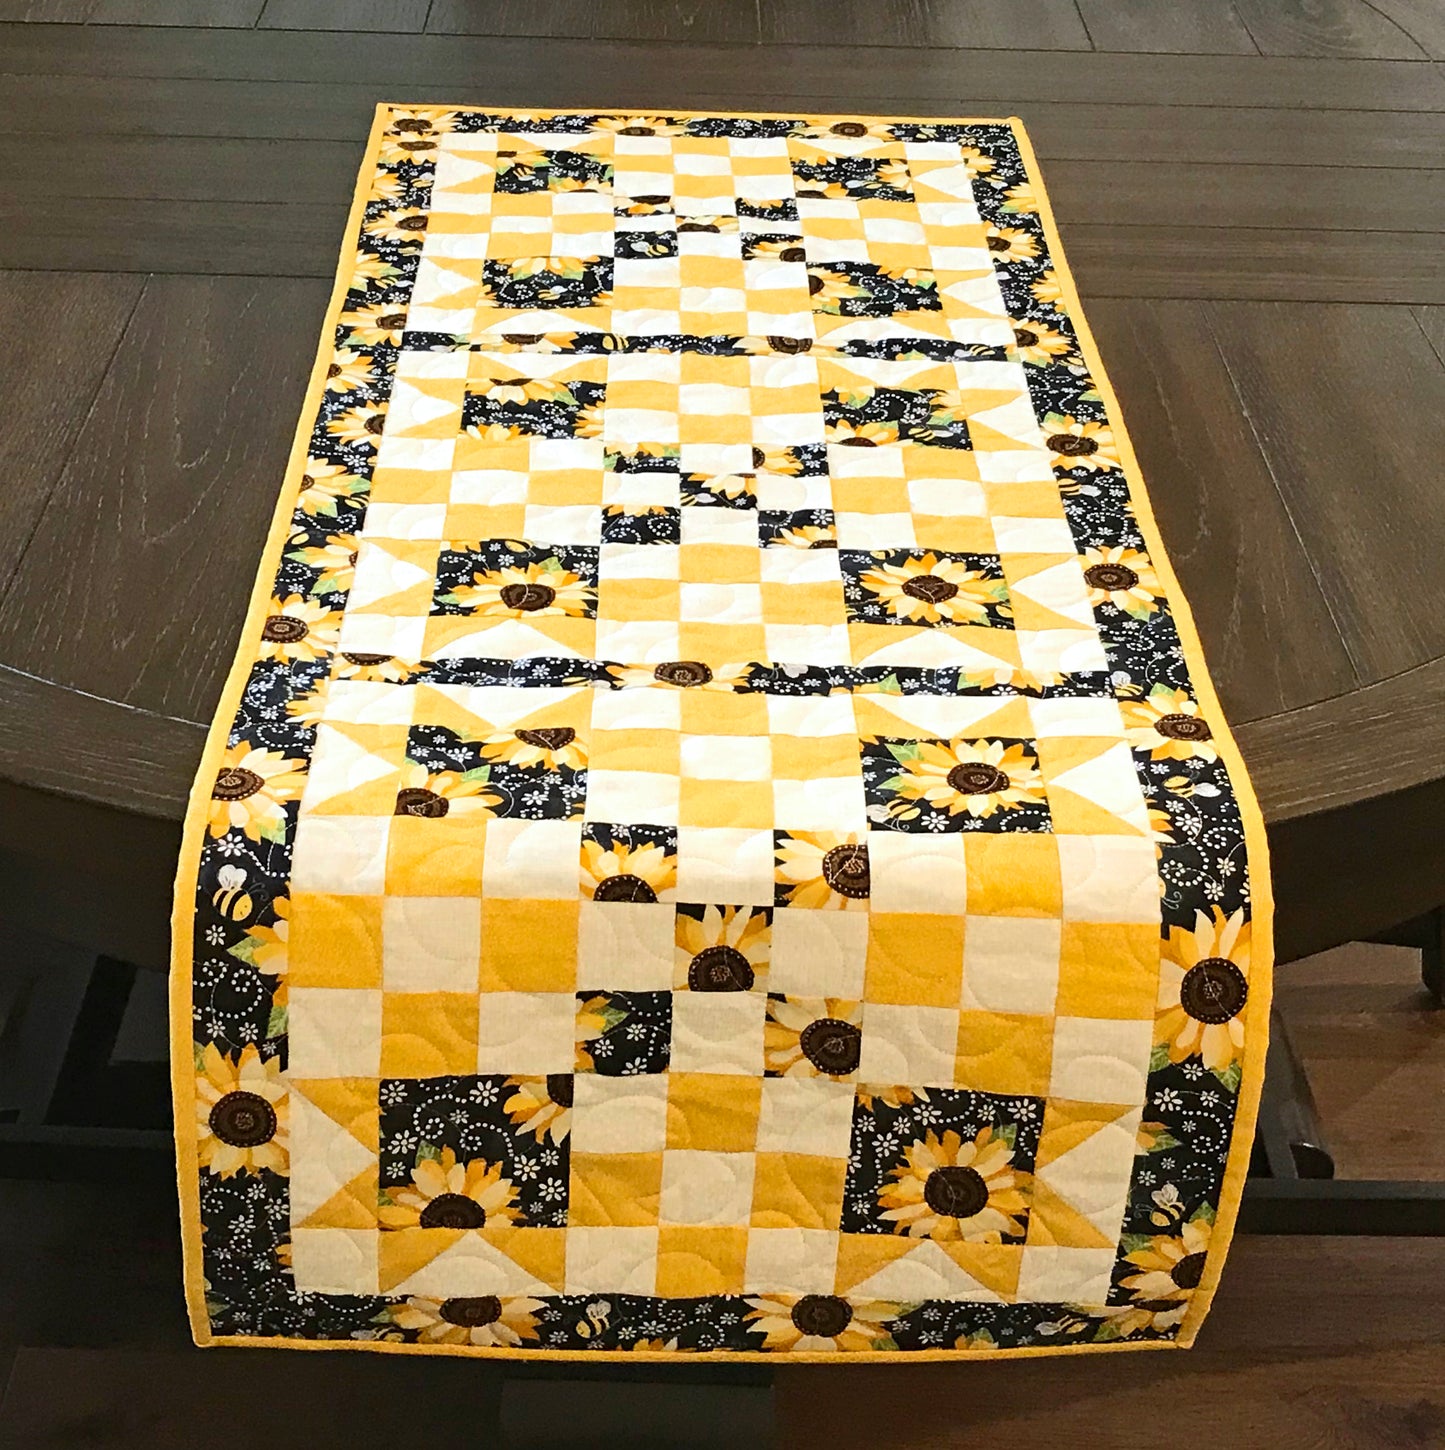 table runner hanging off a table for pattern for a table runner or table topper that has sawtooth star corner units with nine patch blocks in between.